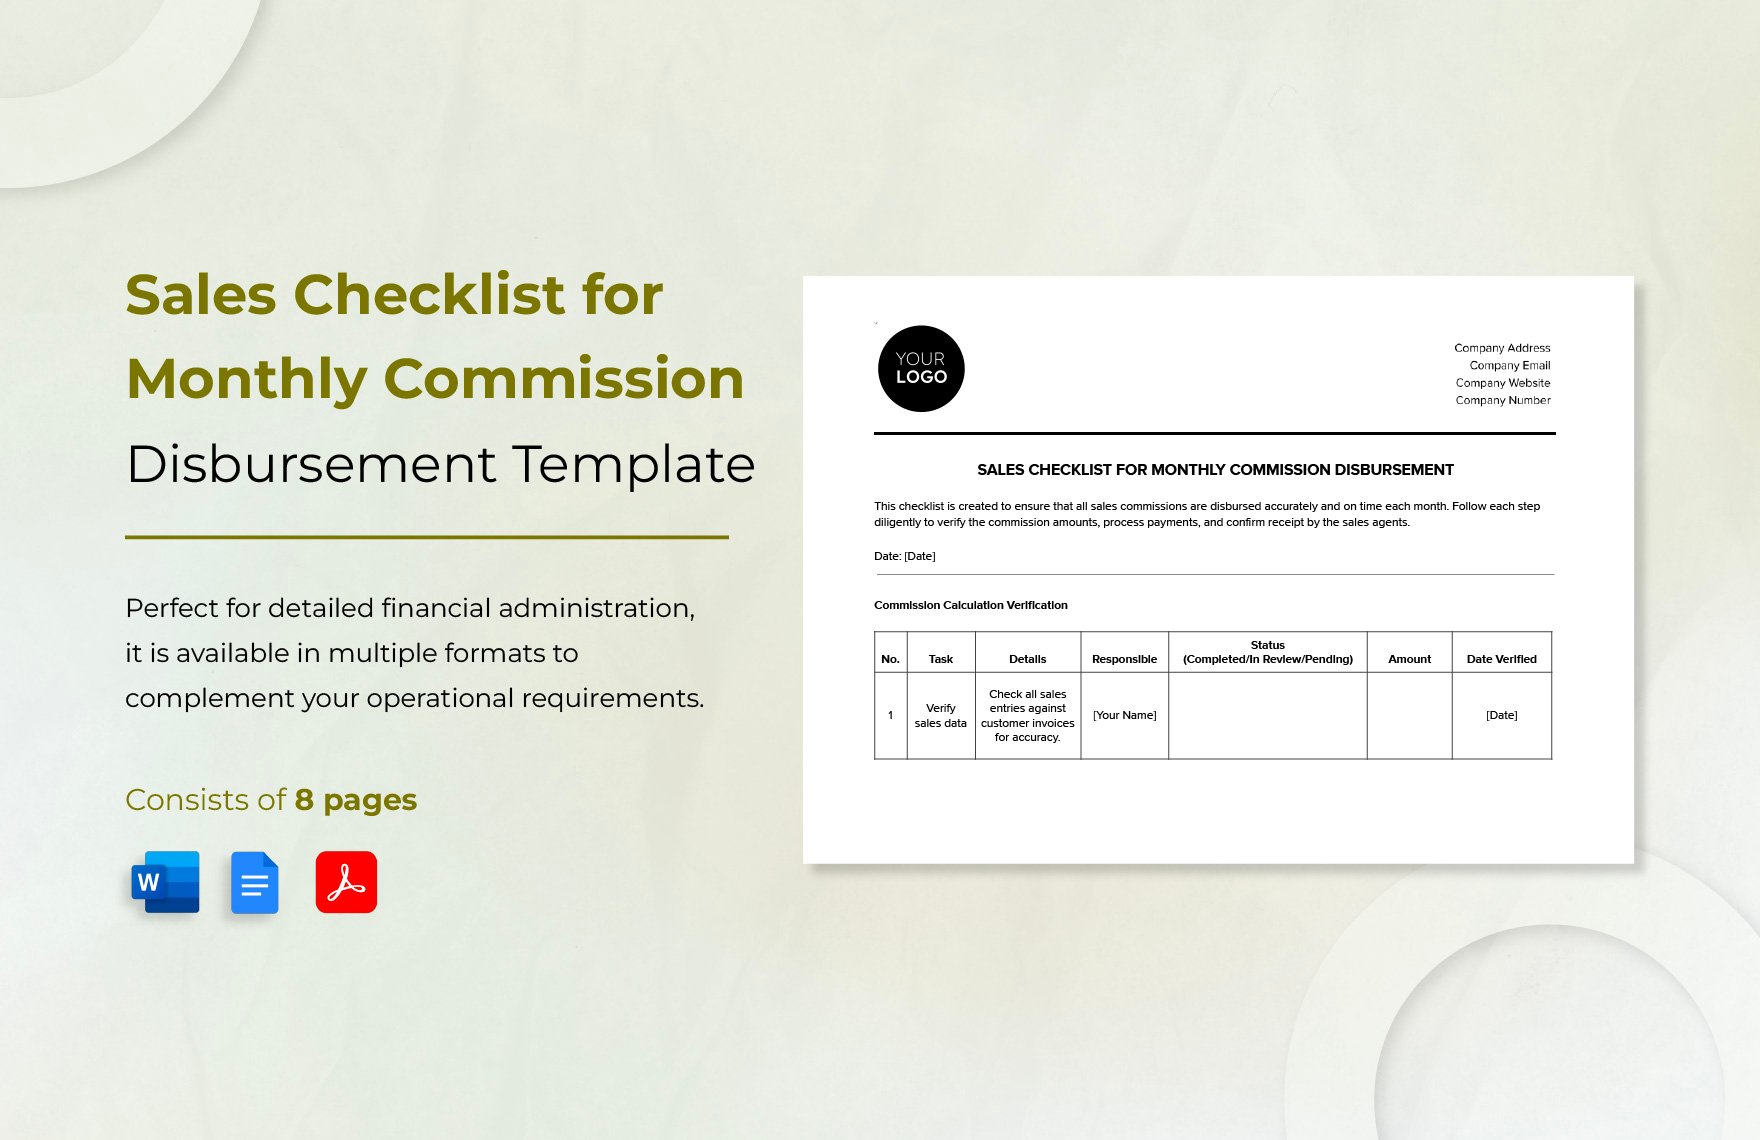 Sales Checklist for Monthly Commission Disbursement Template in Word, Google Docs, PDF